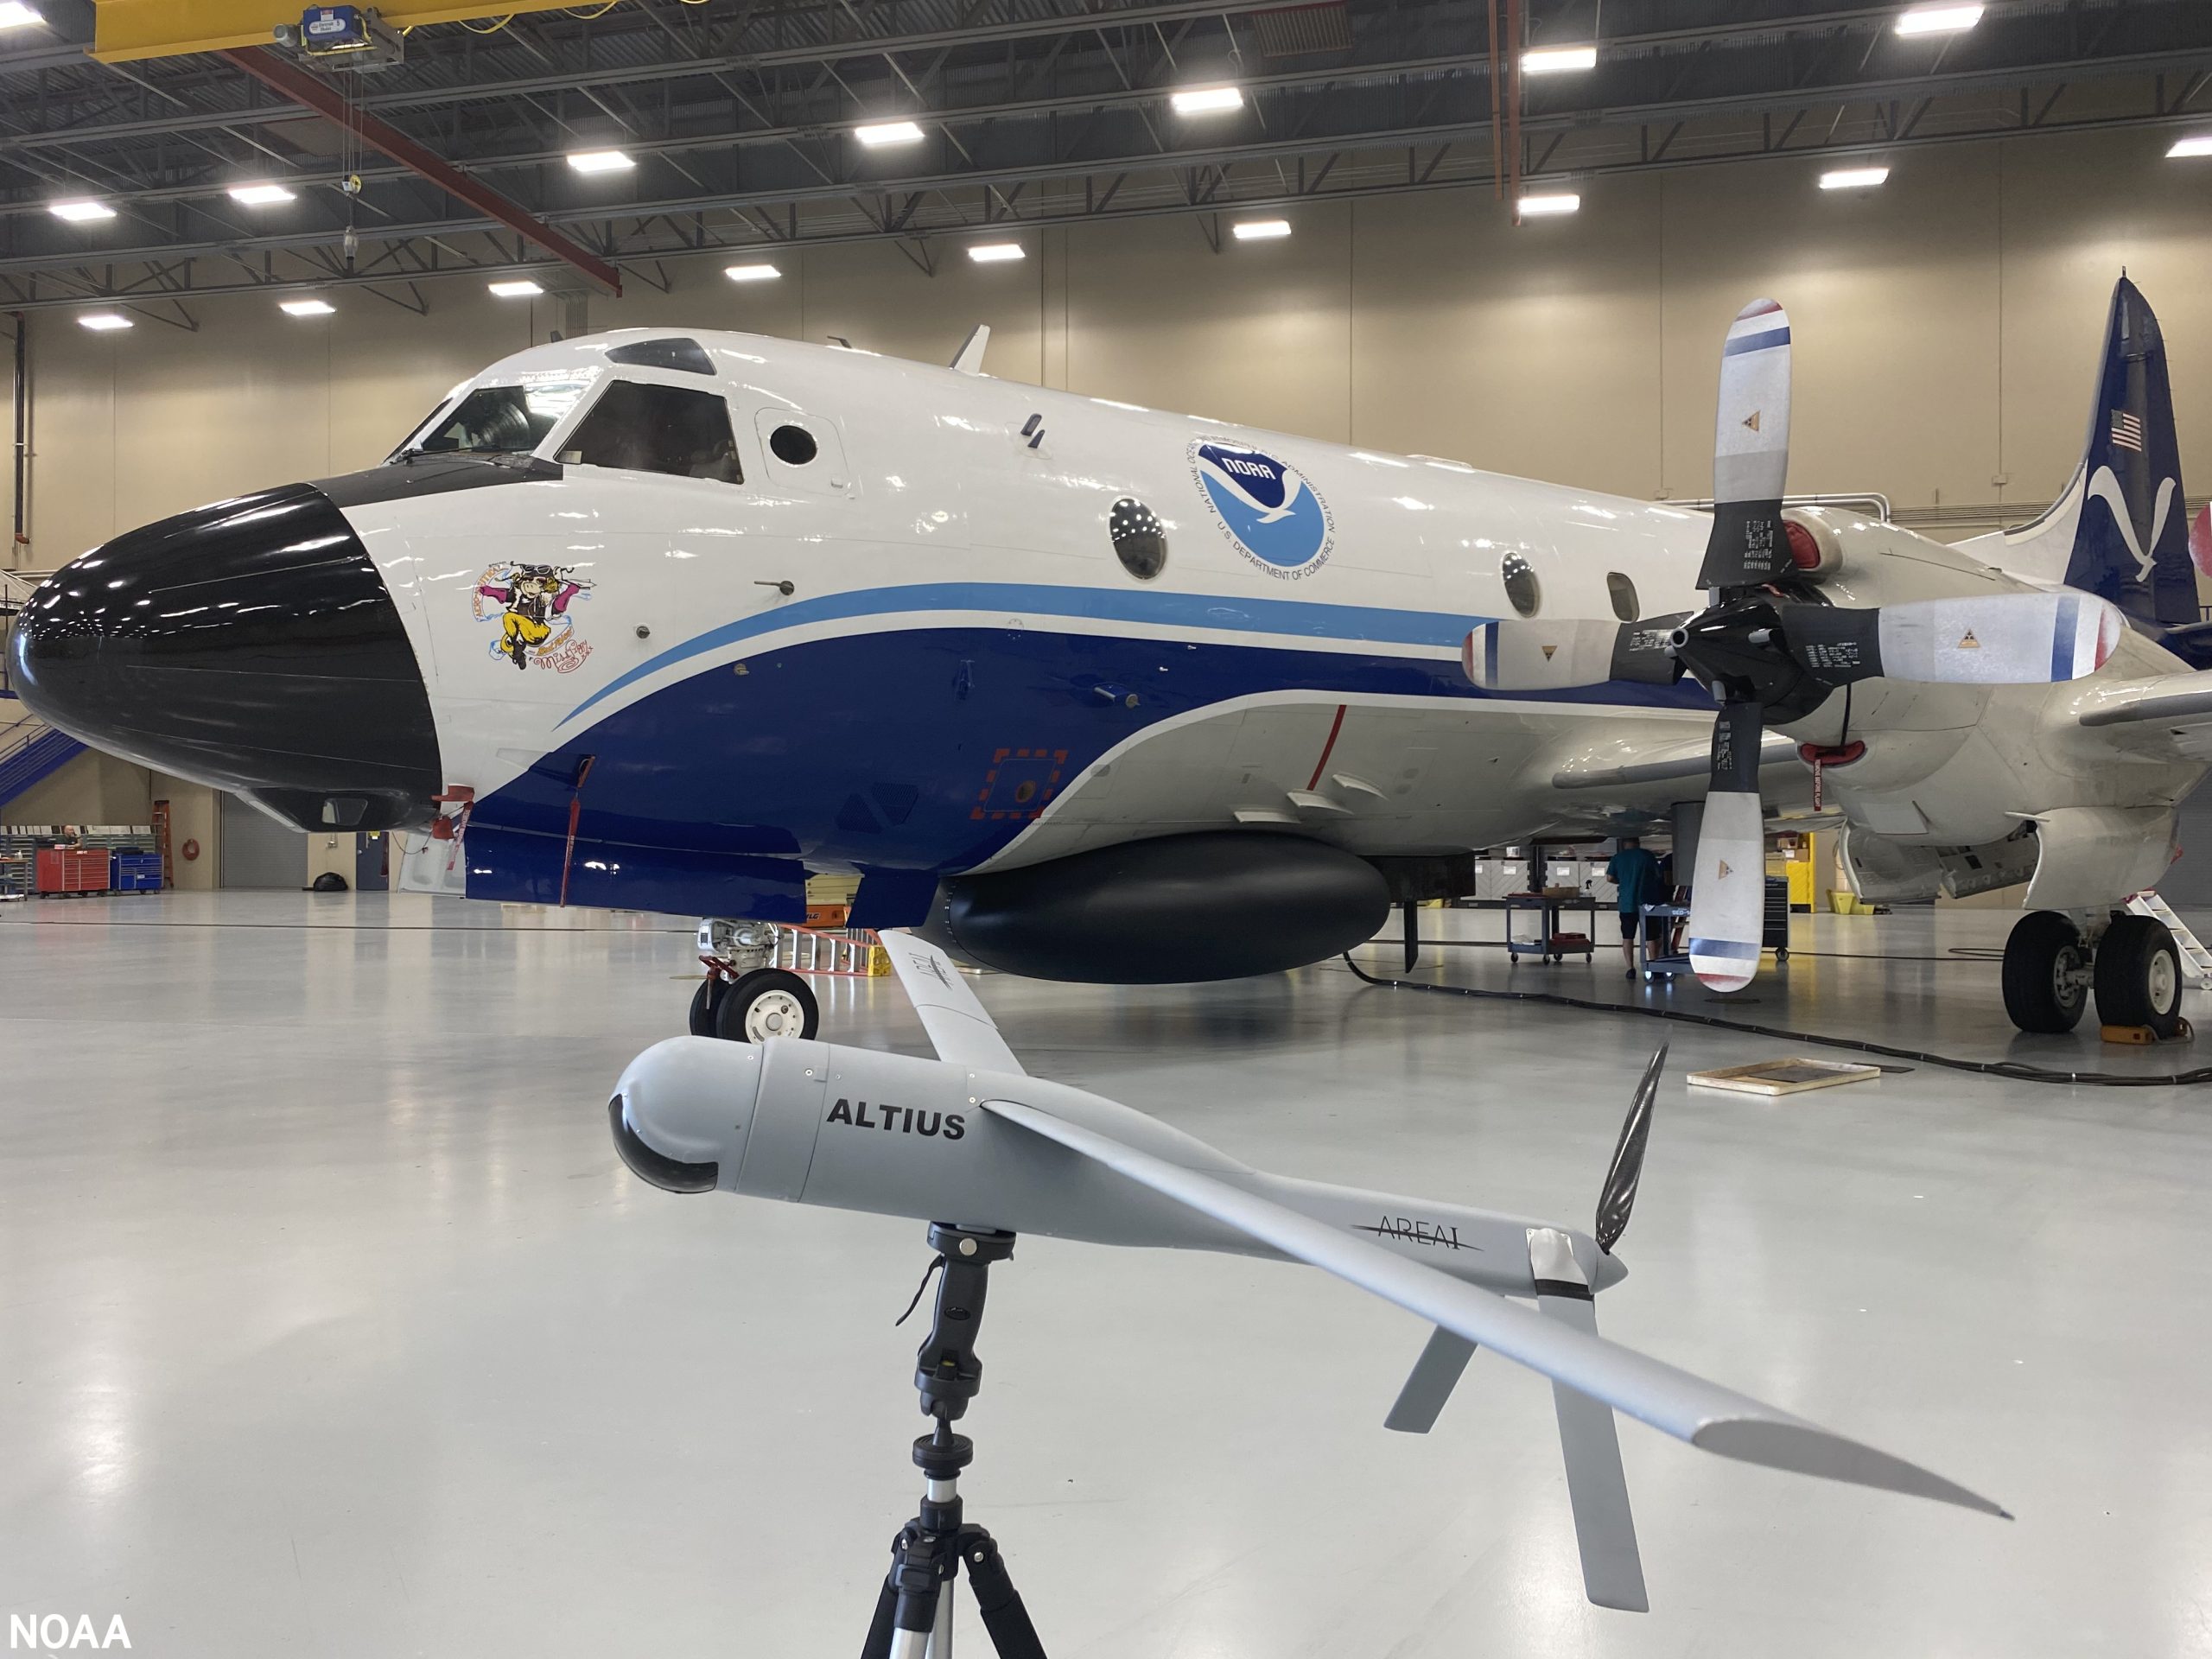 An Altius-600 uncrewed aircraft system demonstration model appears in front of an Hurricane Hunter NOAA WP-3D Orion at NOAA's Aircraft Operations Center in Lakeland, Florida.